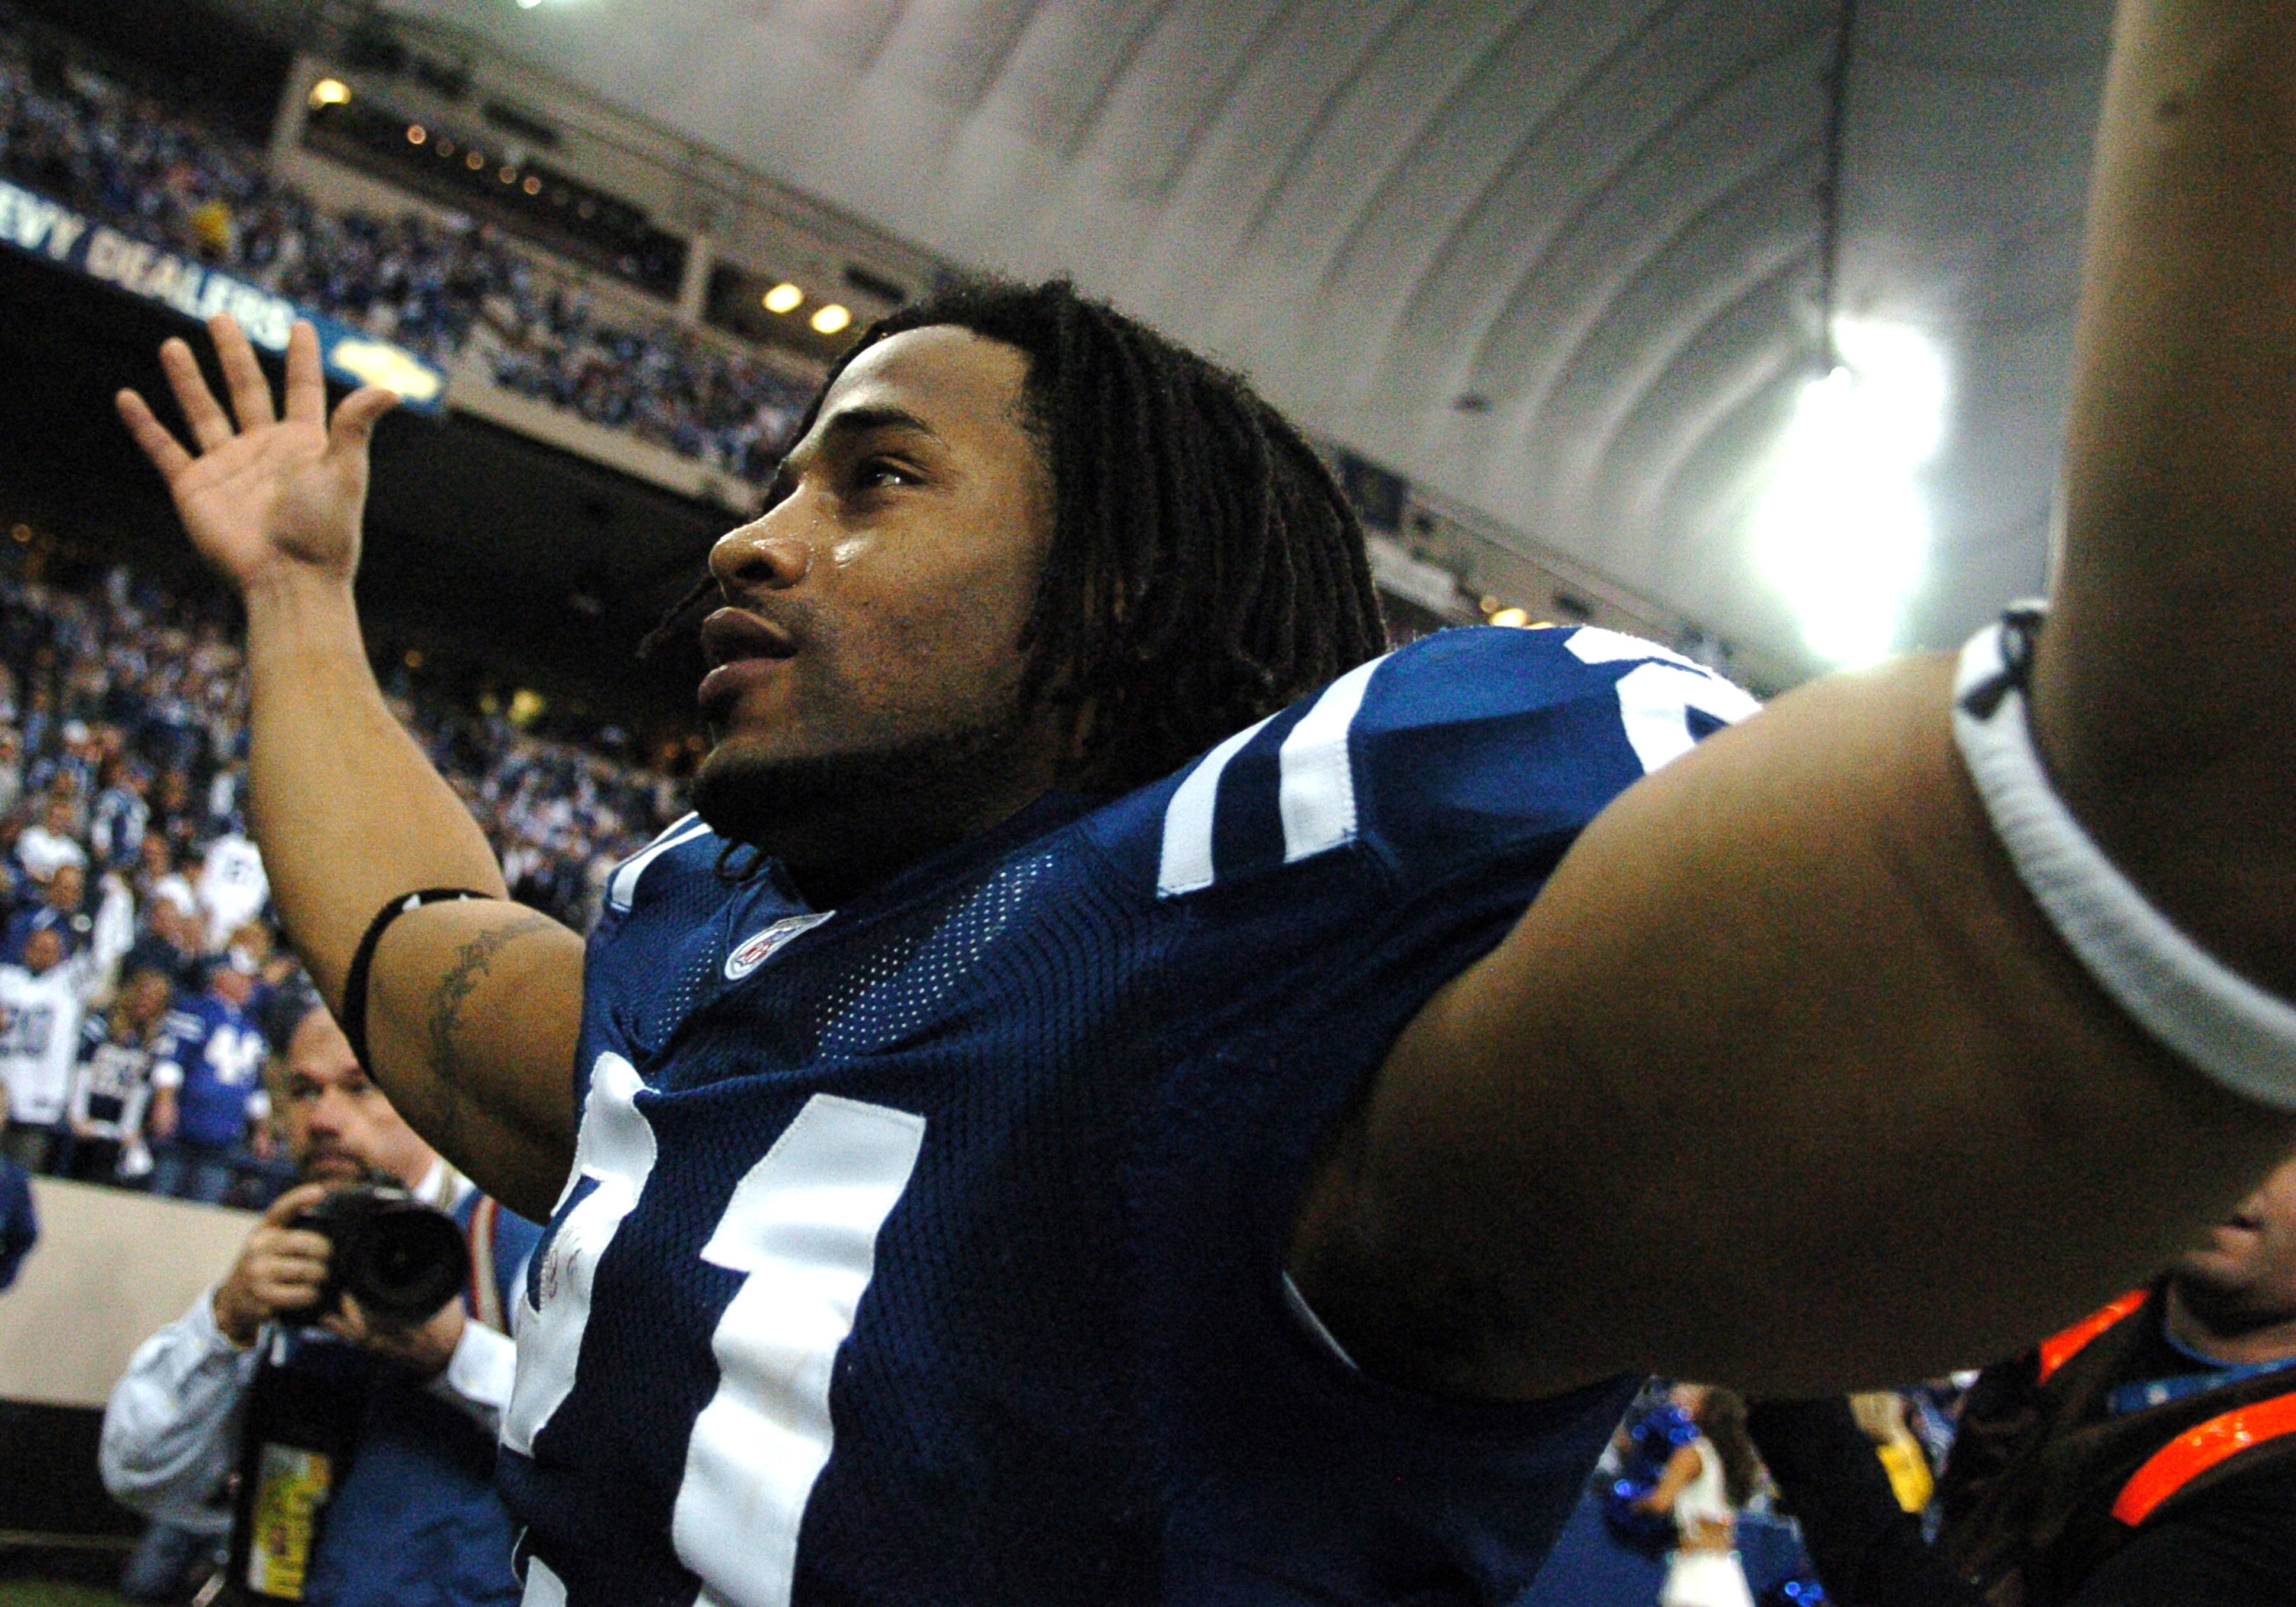 Indianapolis Colts defensive back Bob Sanders celebrates a victory against the Kansas City Chiefs in Wild Card Playoff action on January 6, 2007 at the RCA Dome in Indianapolis, Indiana. Sanders had an interception and the Colts won 23 - 8.  (Photo by Al 